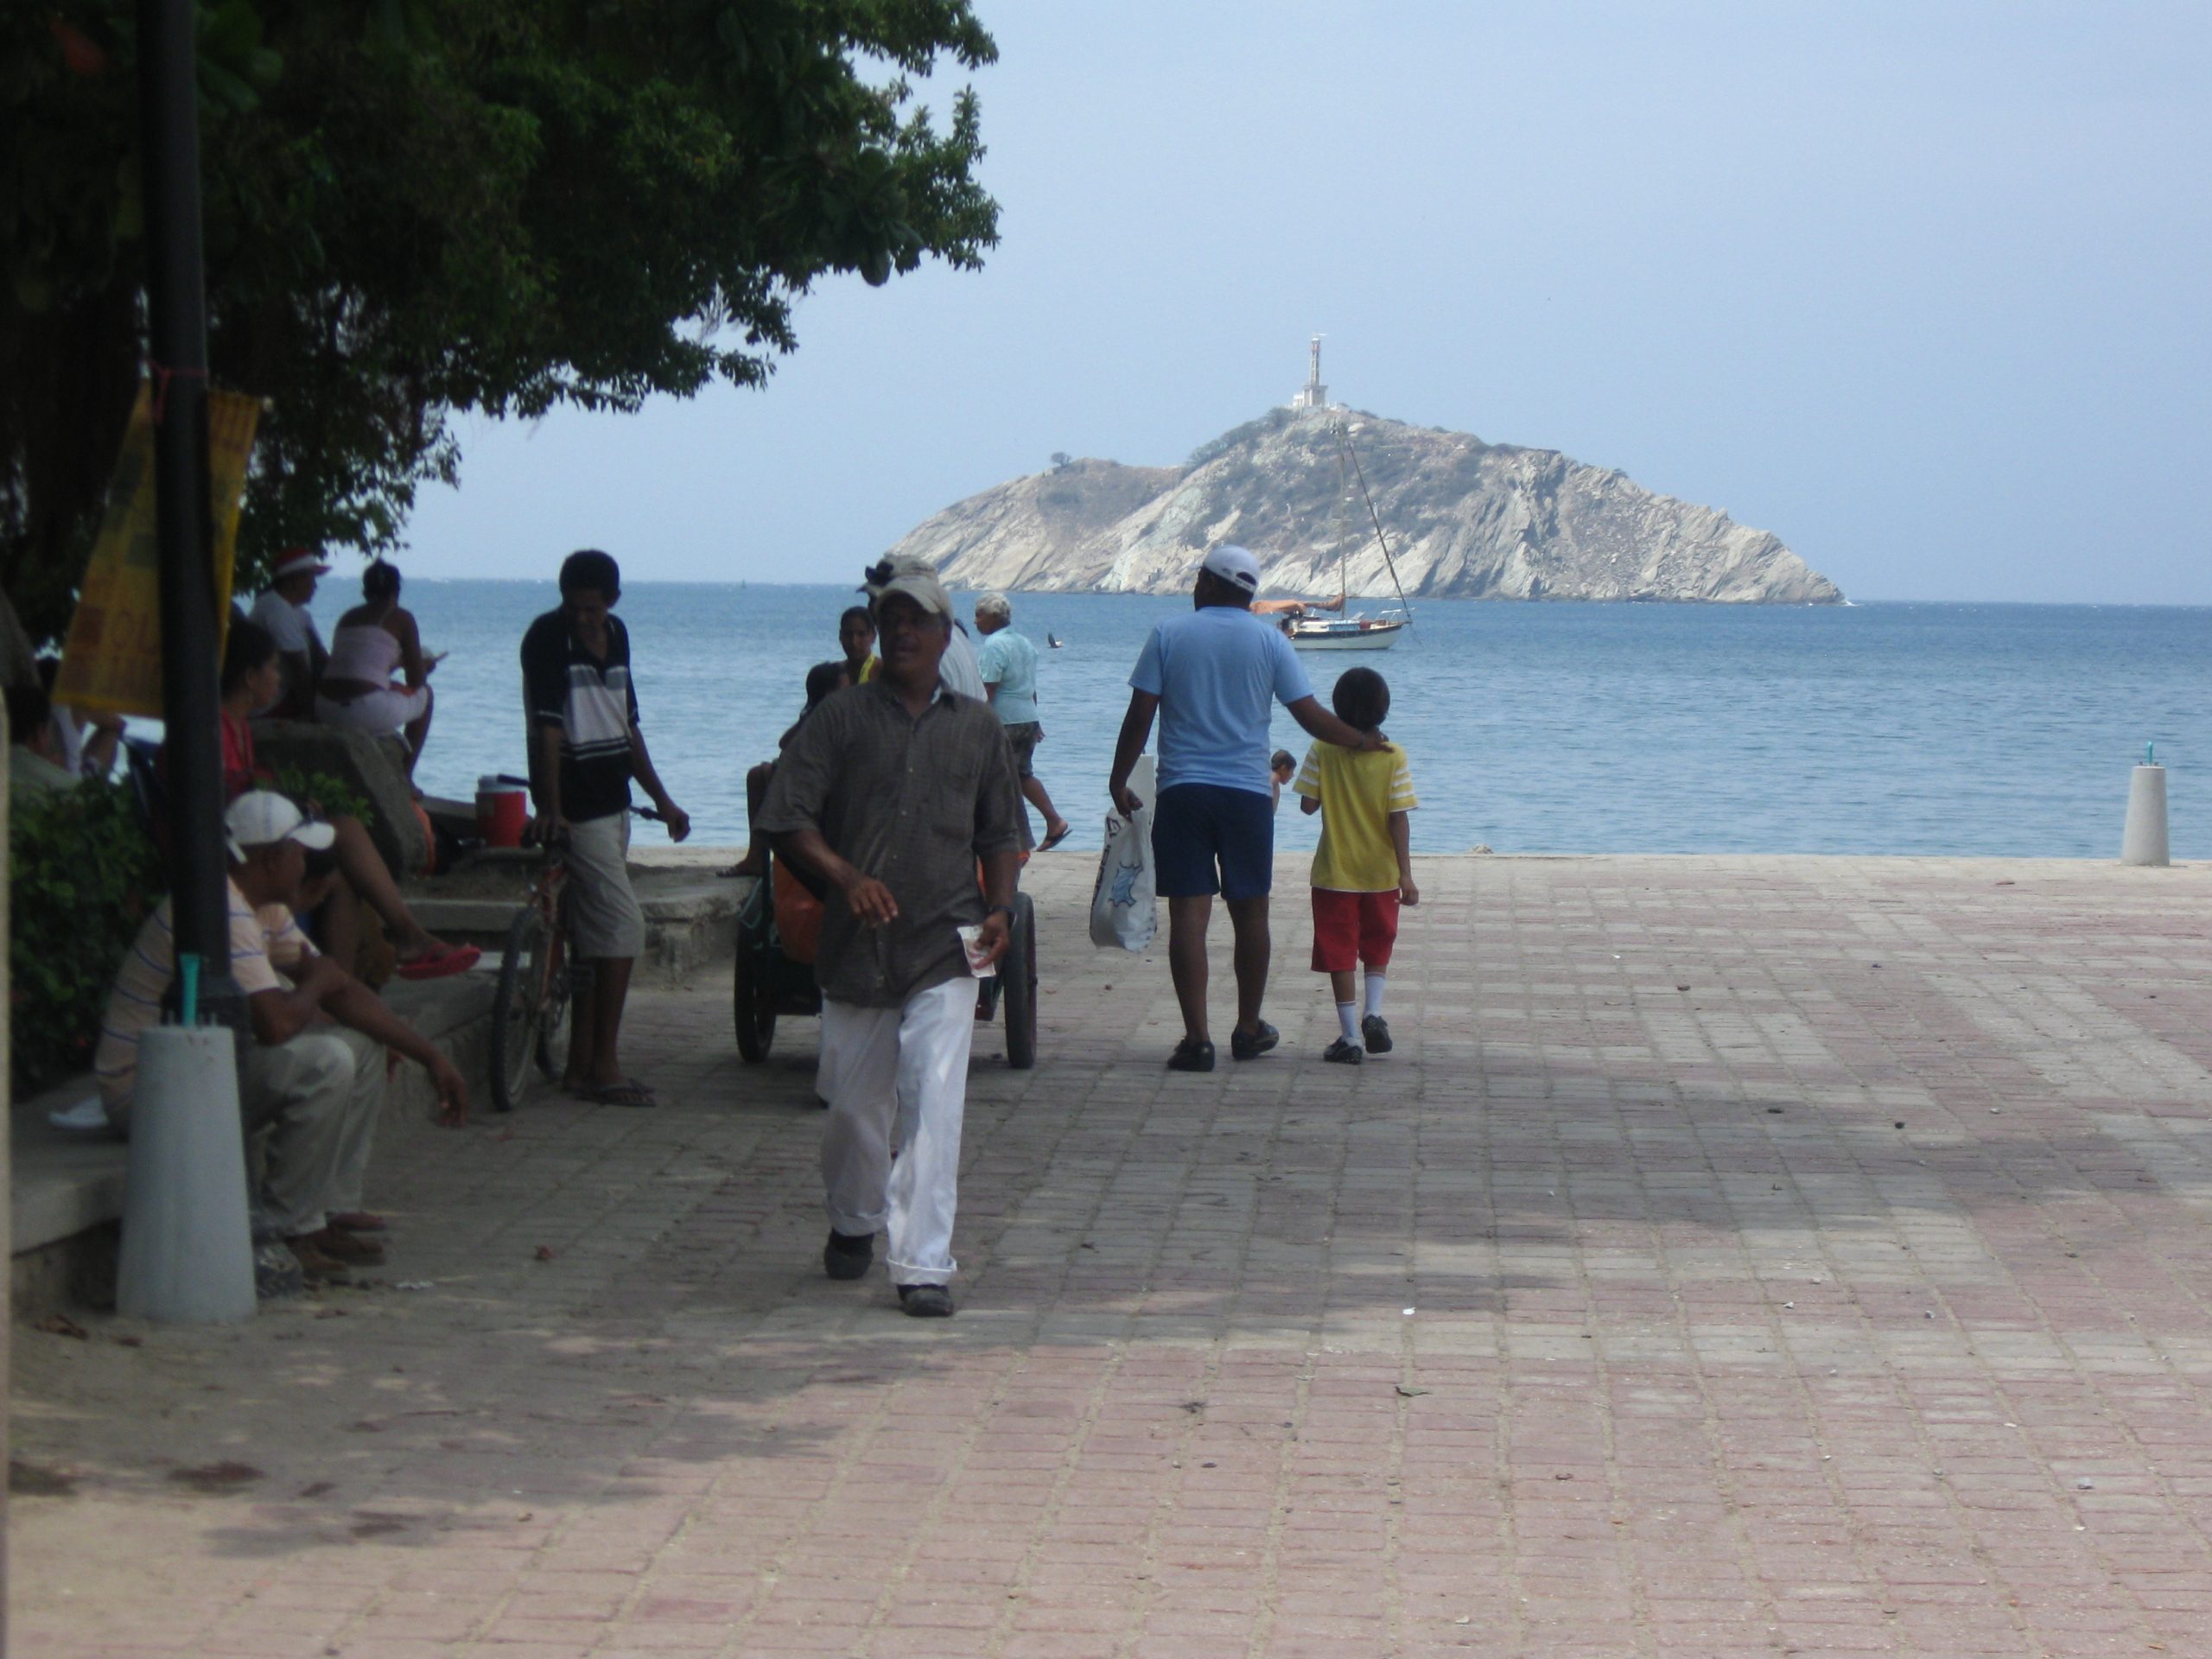 A man walks with his son on a port walkway in Santa Marta, Colombia.